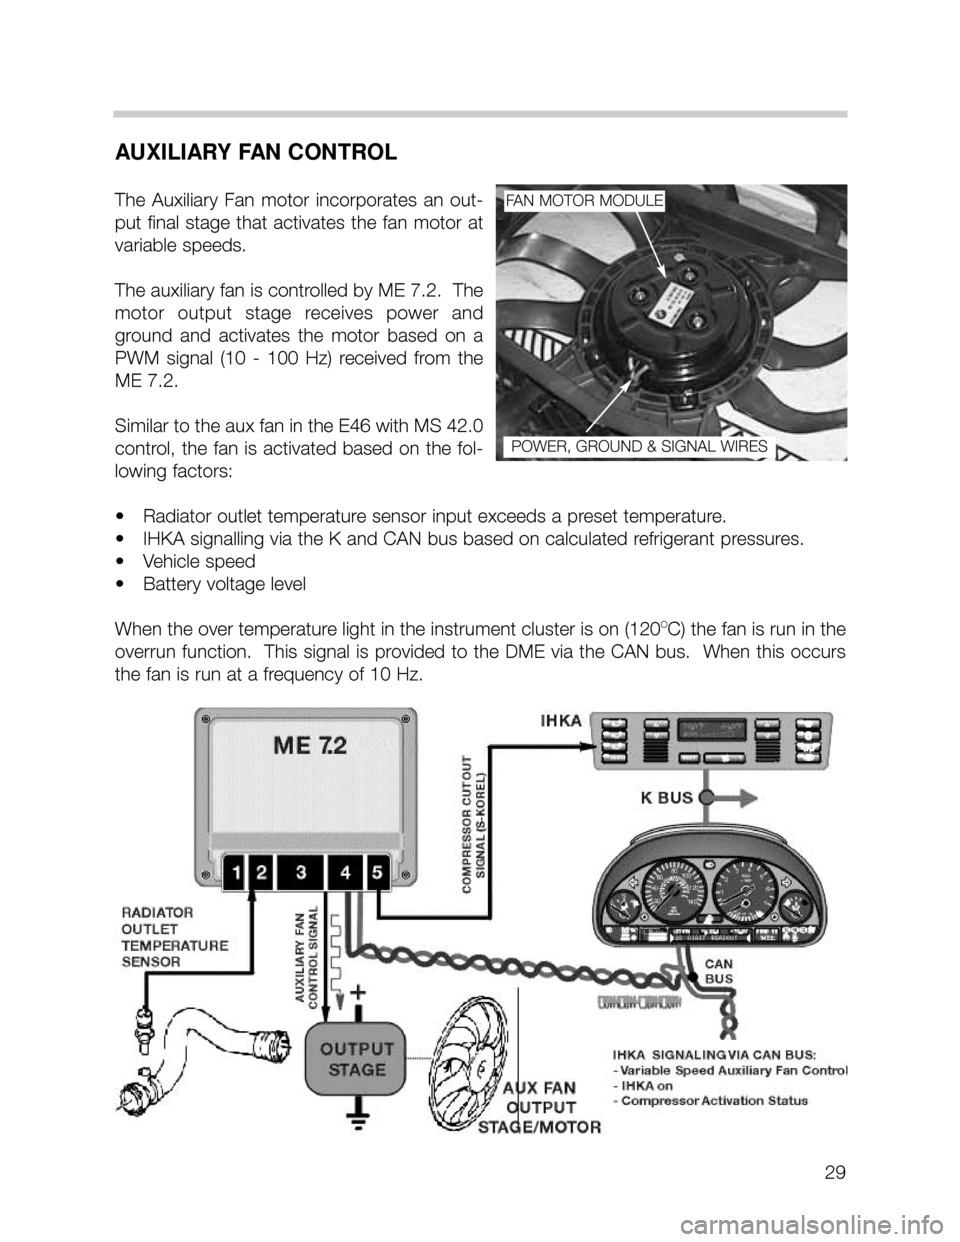 BMW 735i 2001 E38 M62TU Engine Workshop Manual 29
AUXILIARY FAN CONTROL
The  Auxiliary  Fan  motor  incorporates  an  out-
put  final  stage  that  activates  the  fan  motor  at
variable speeds.  
The auxiliary fan is controlled by ME 7.2.  The
m